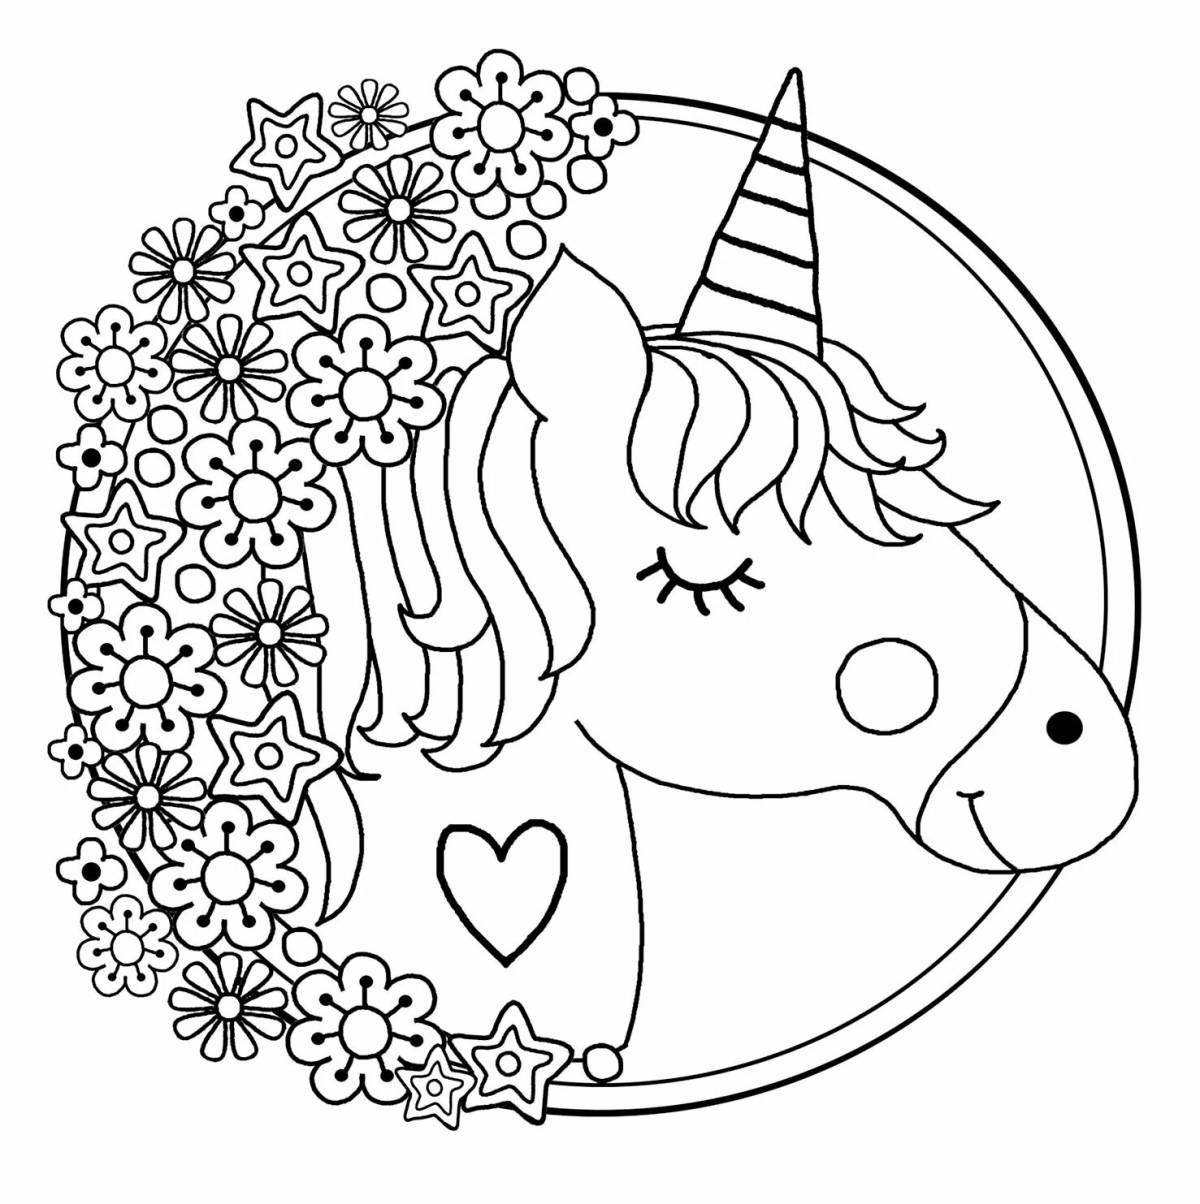 Adorable coloring book for girls 7-8 years old